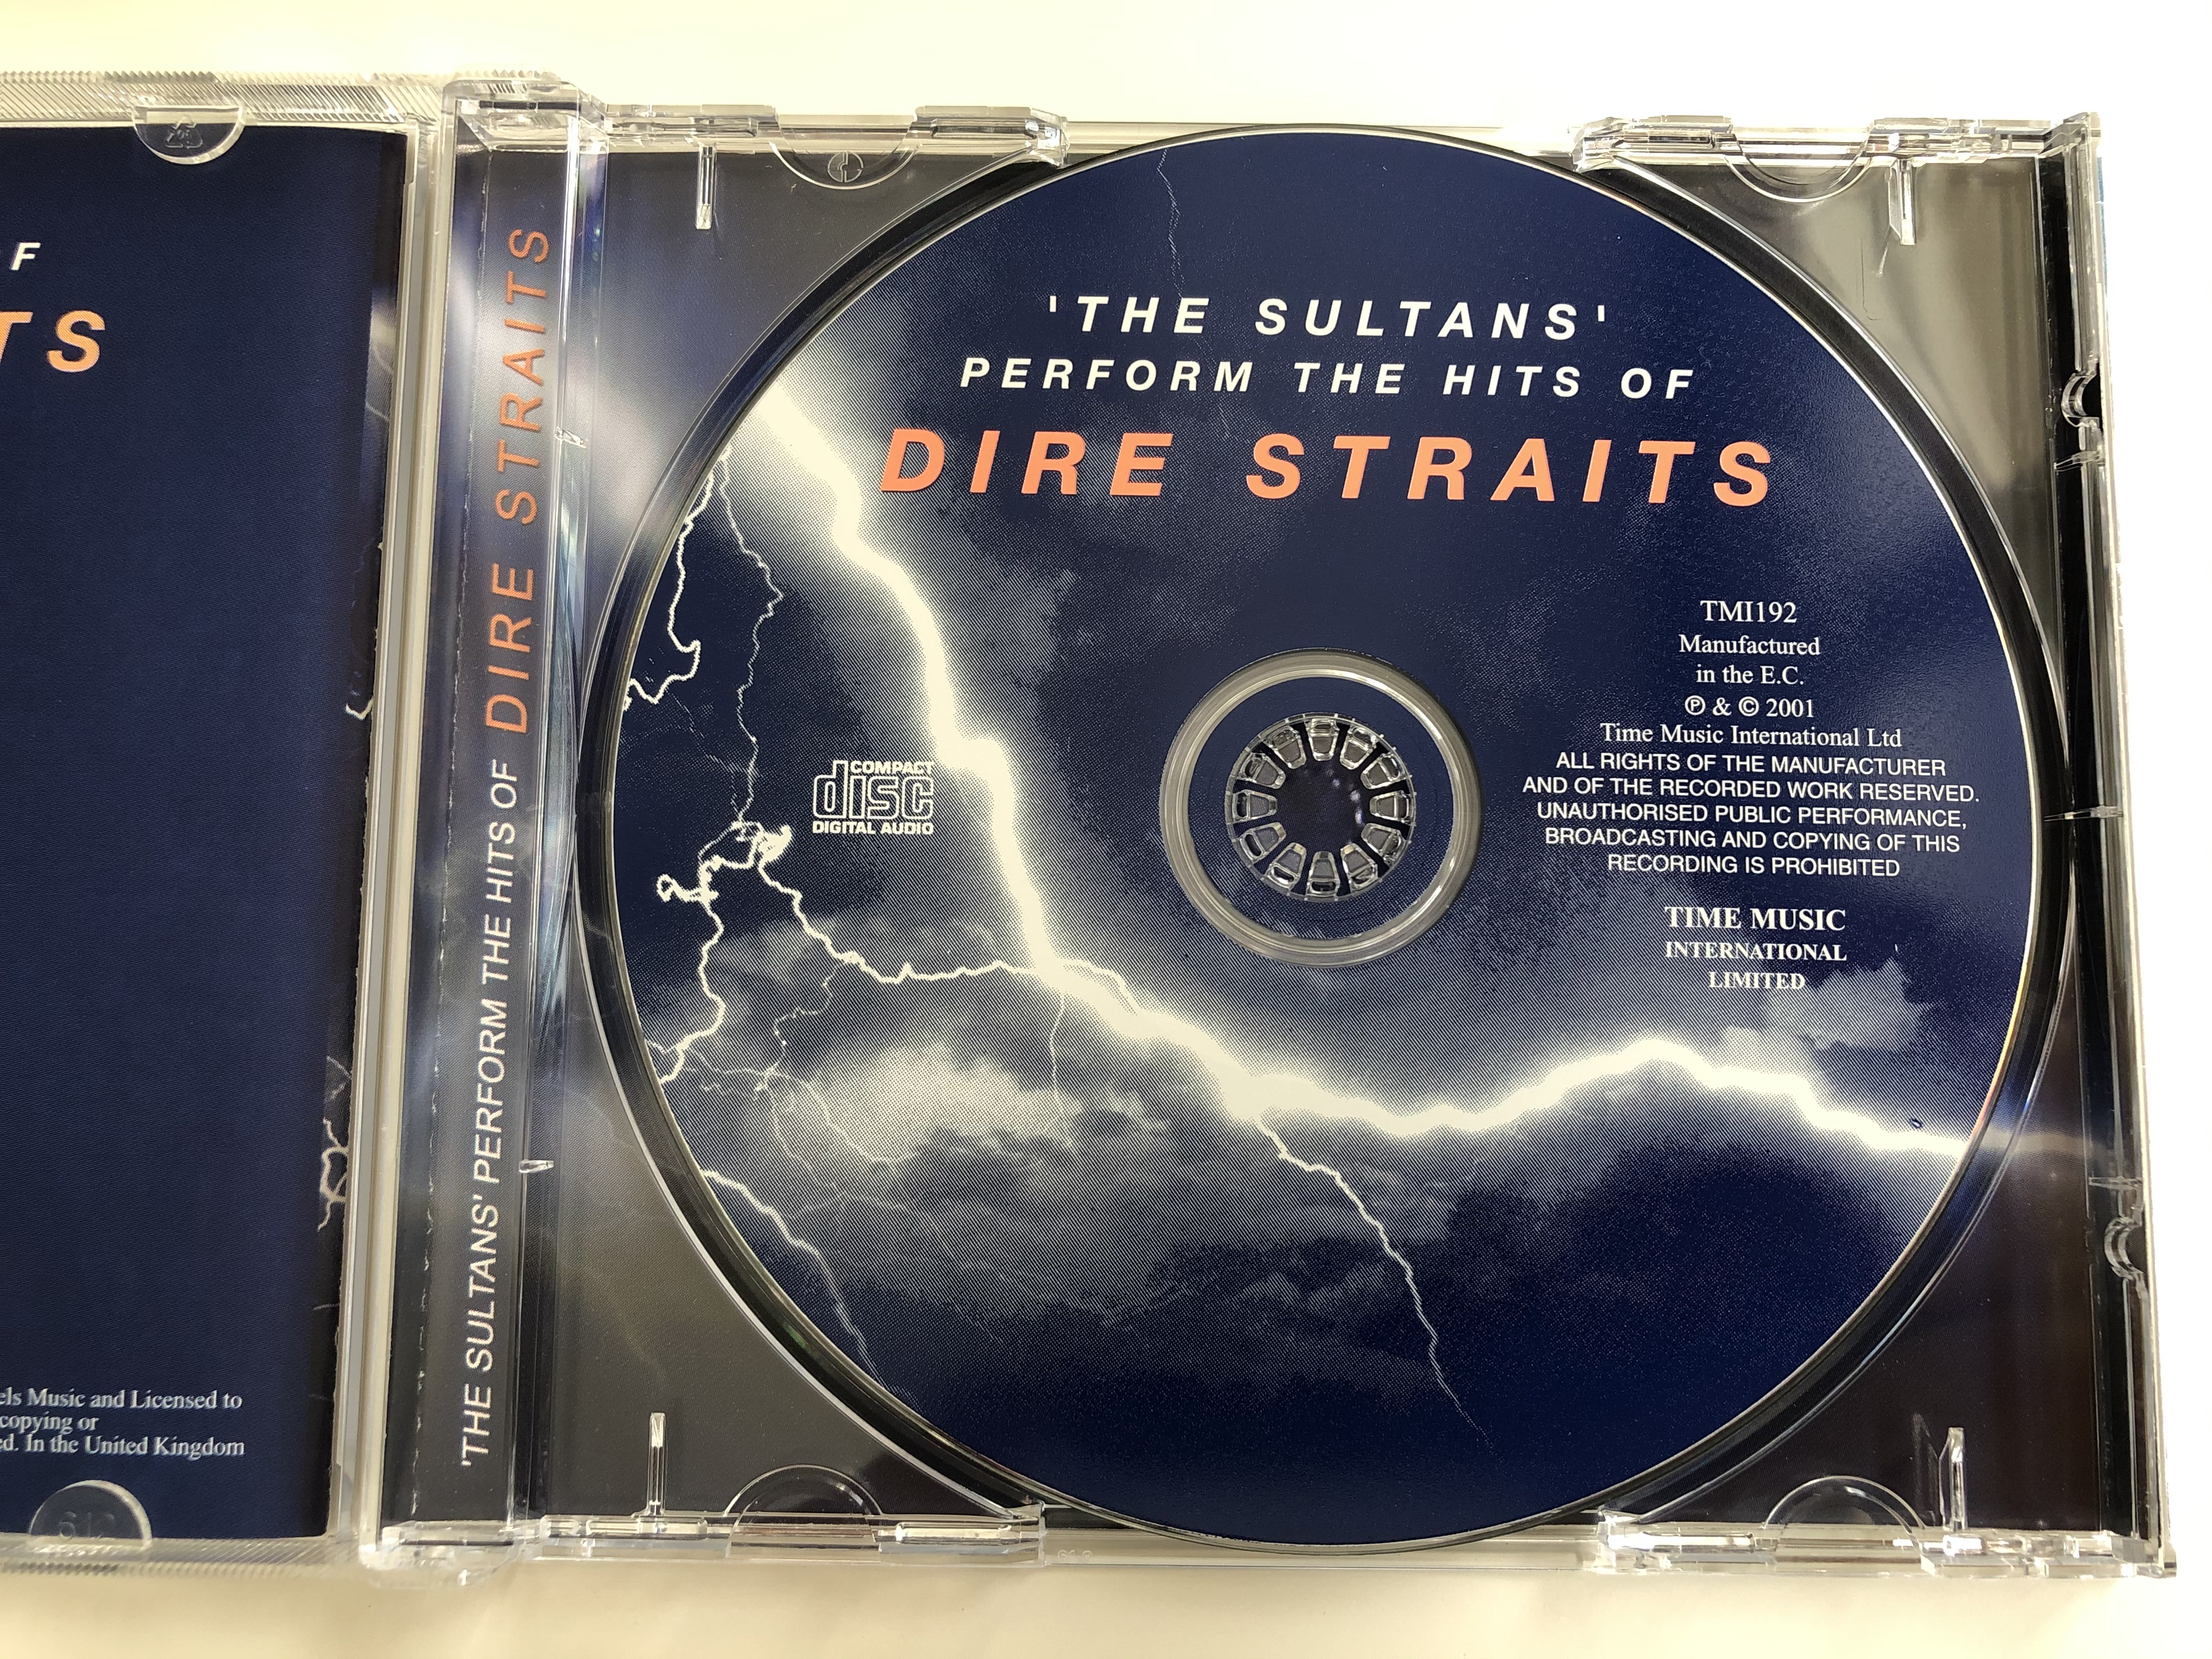 -the-sultans-perform-the-hits-of-dire-straits-sultans-of-swing-money-for-nothing-private-investigations-and-many-more-time-music-international-ltd.-audio-cd-2001-tmi192-4-.jpg